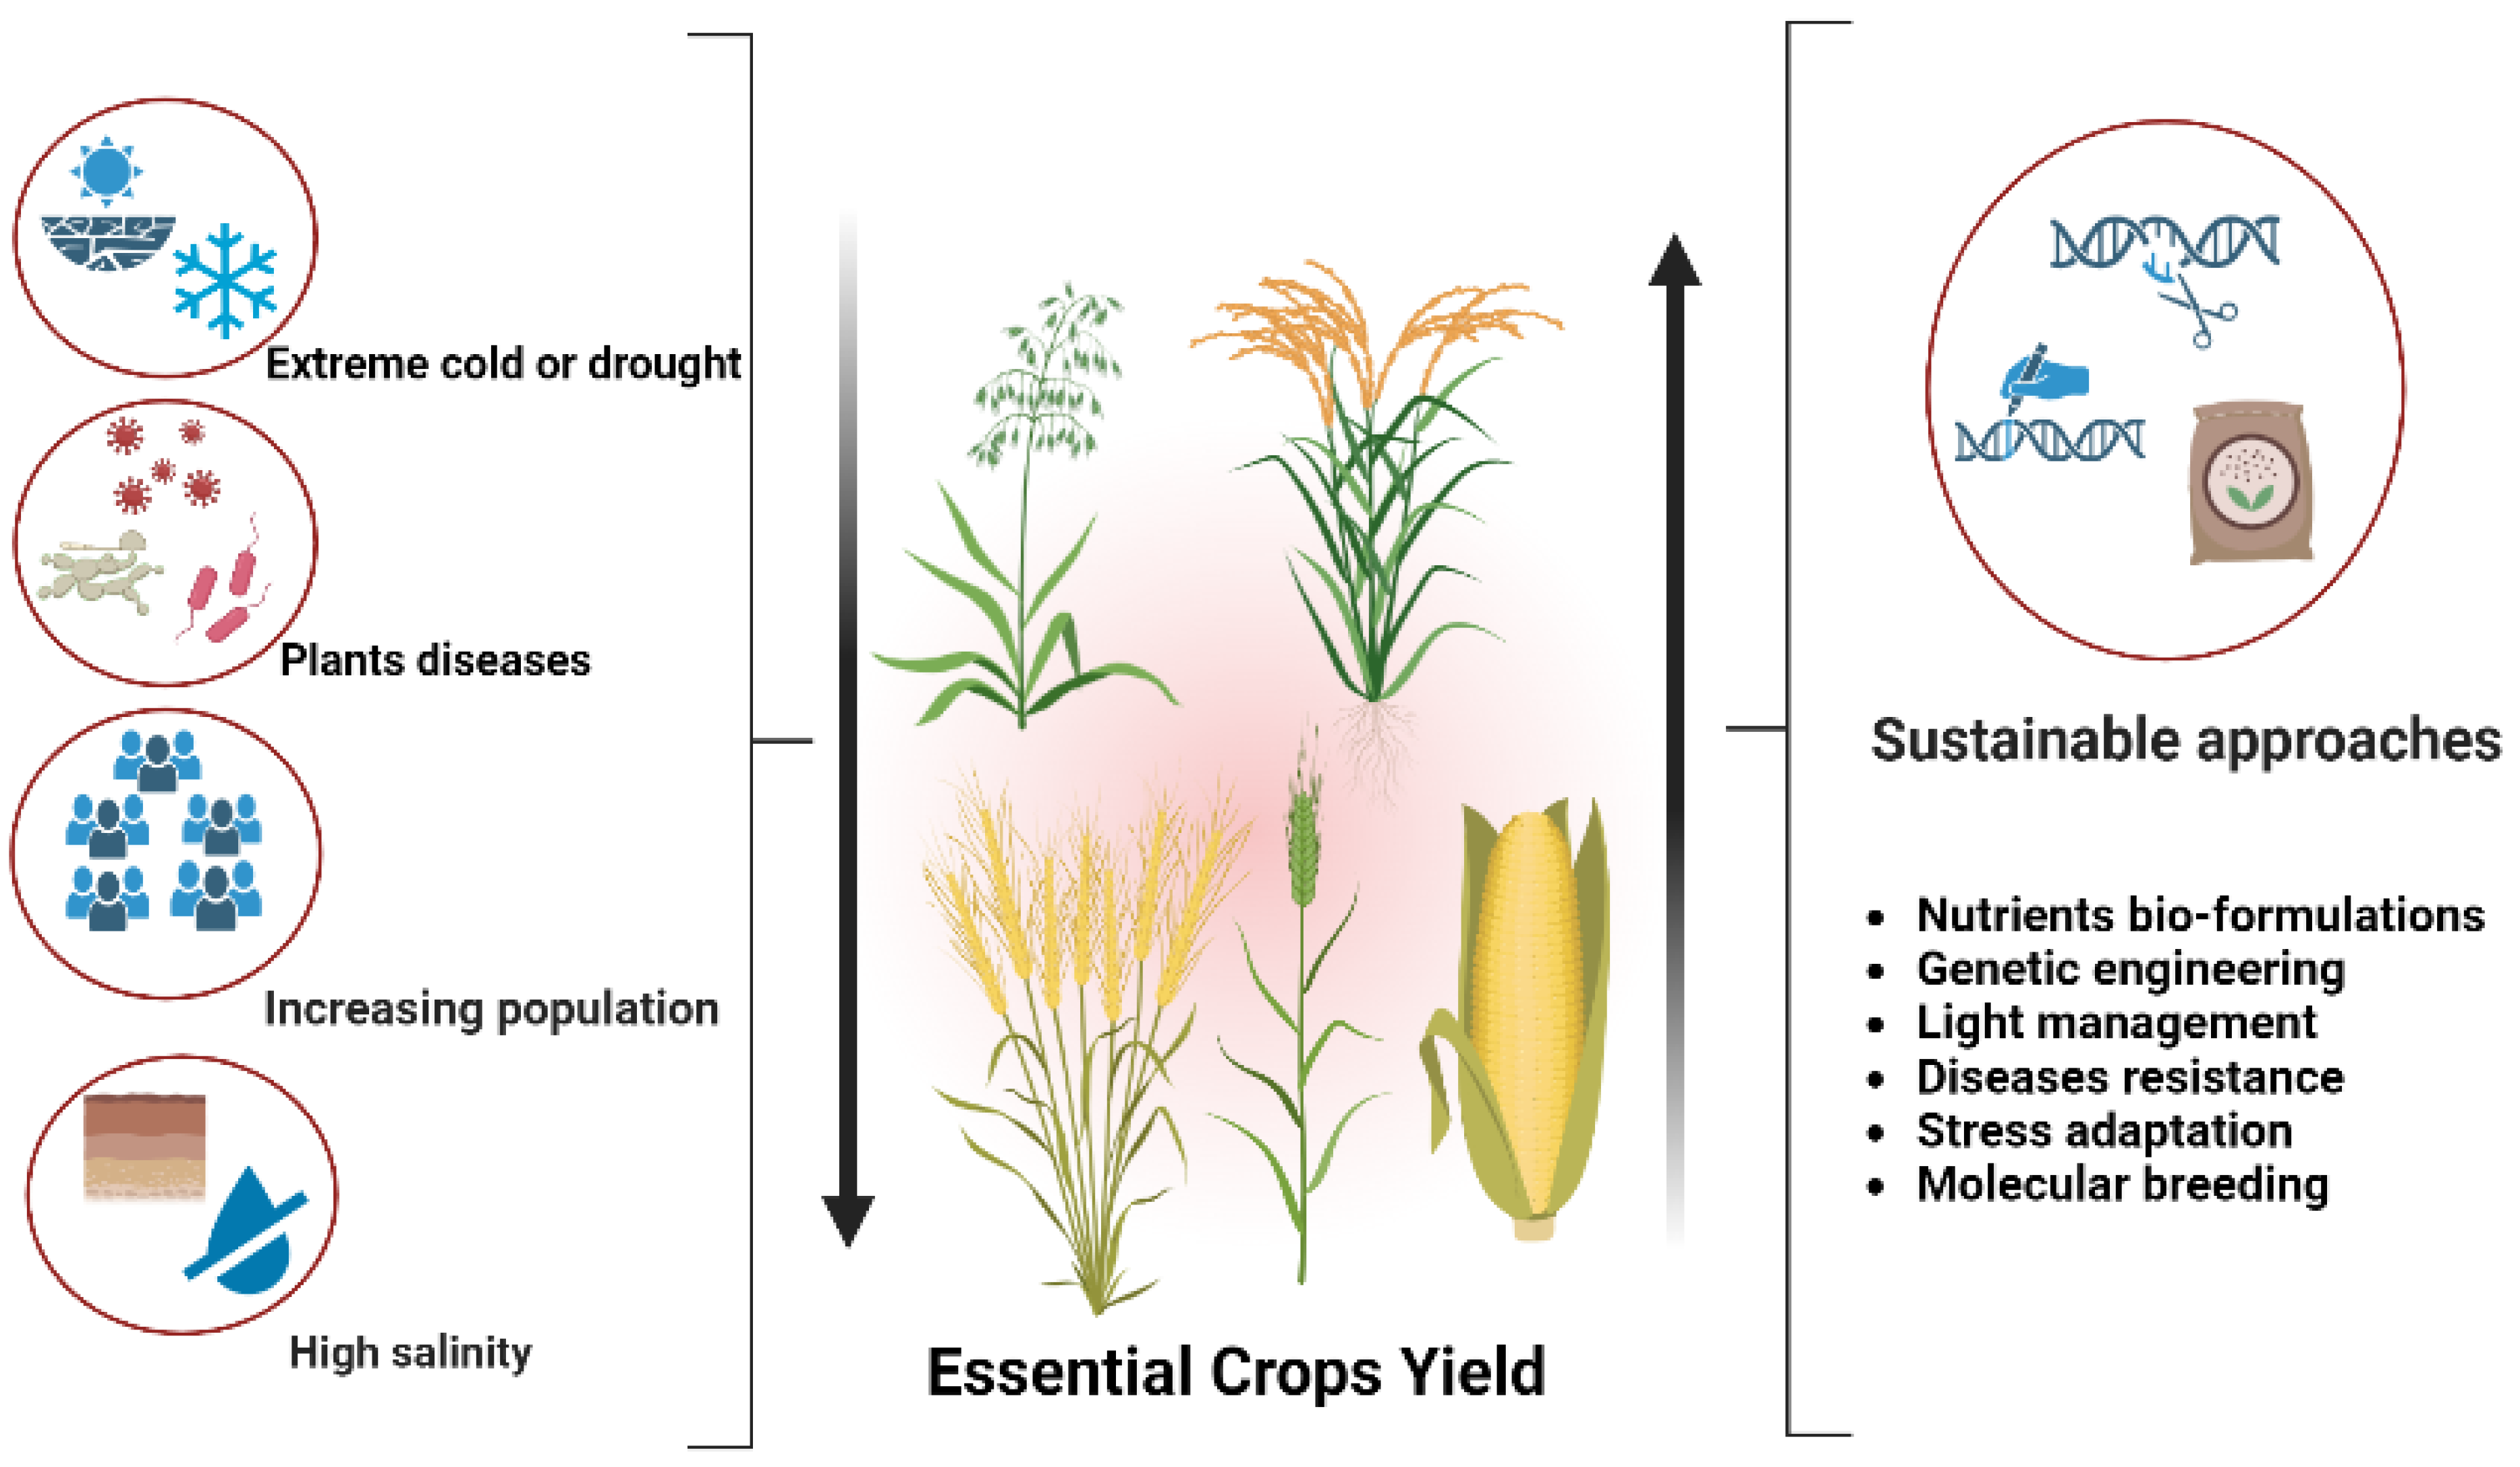 https://www.mdpi.com/agronomy/agronomy-13-01709/article_deploy/html/images/agronomy-13-01709-g001.png